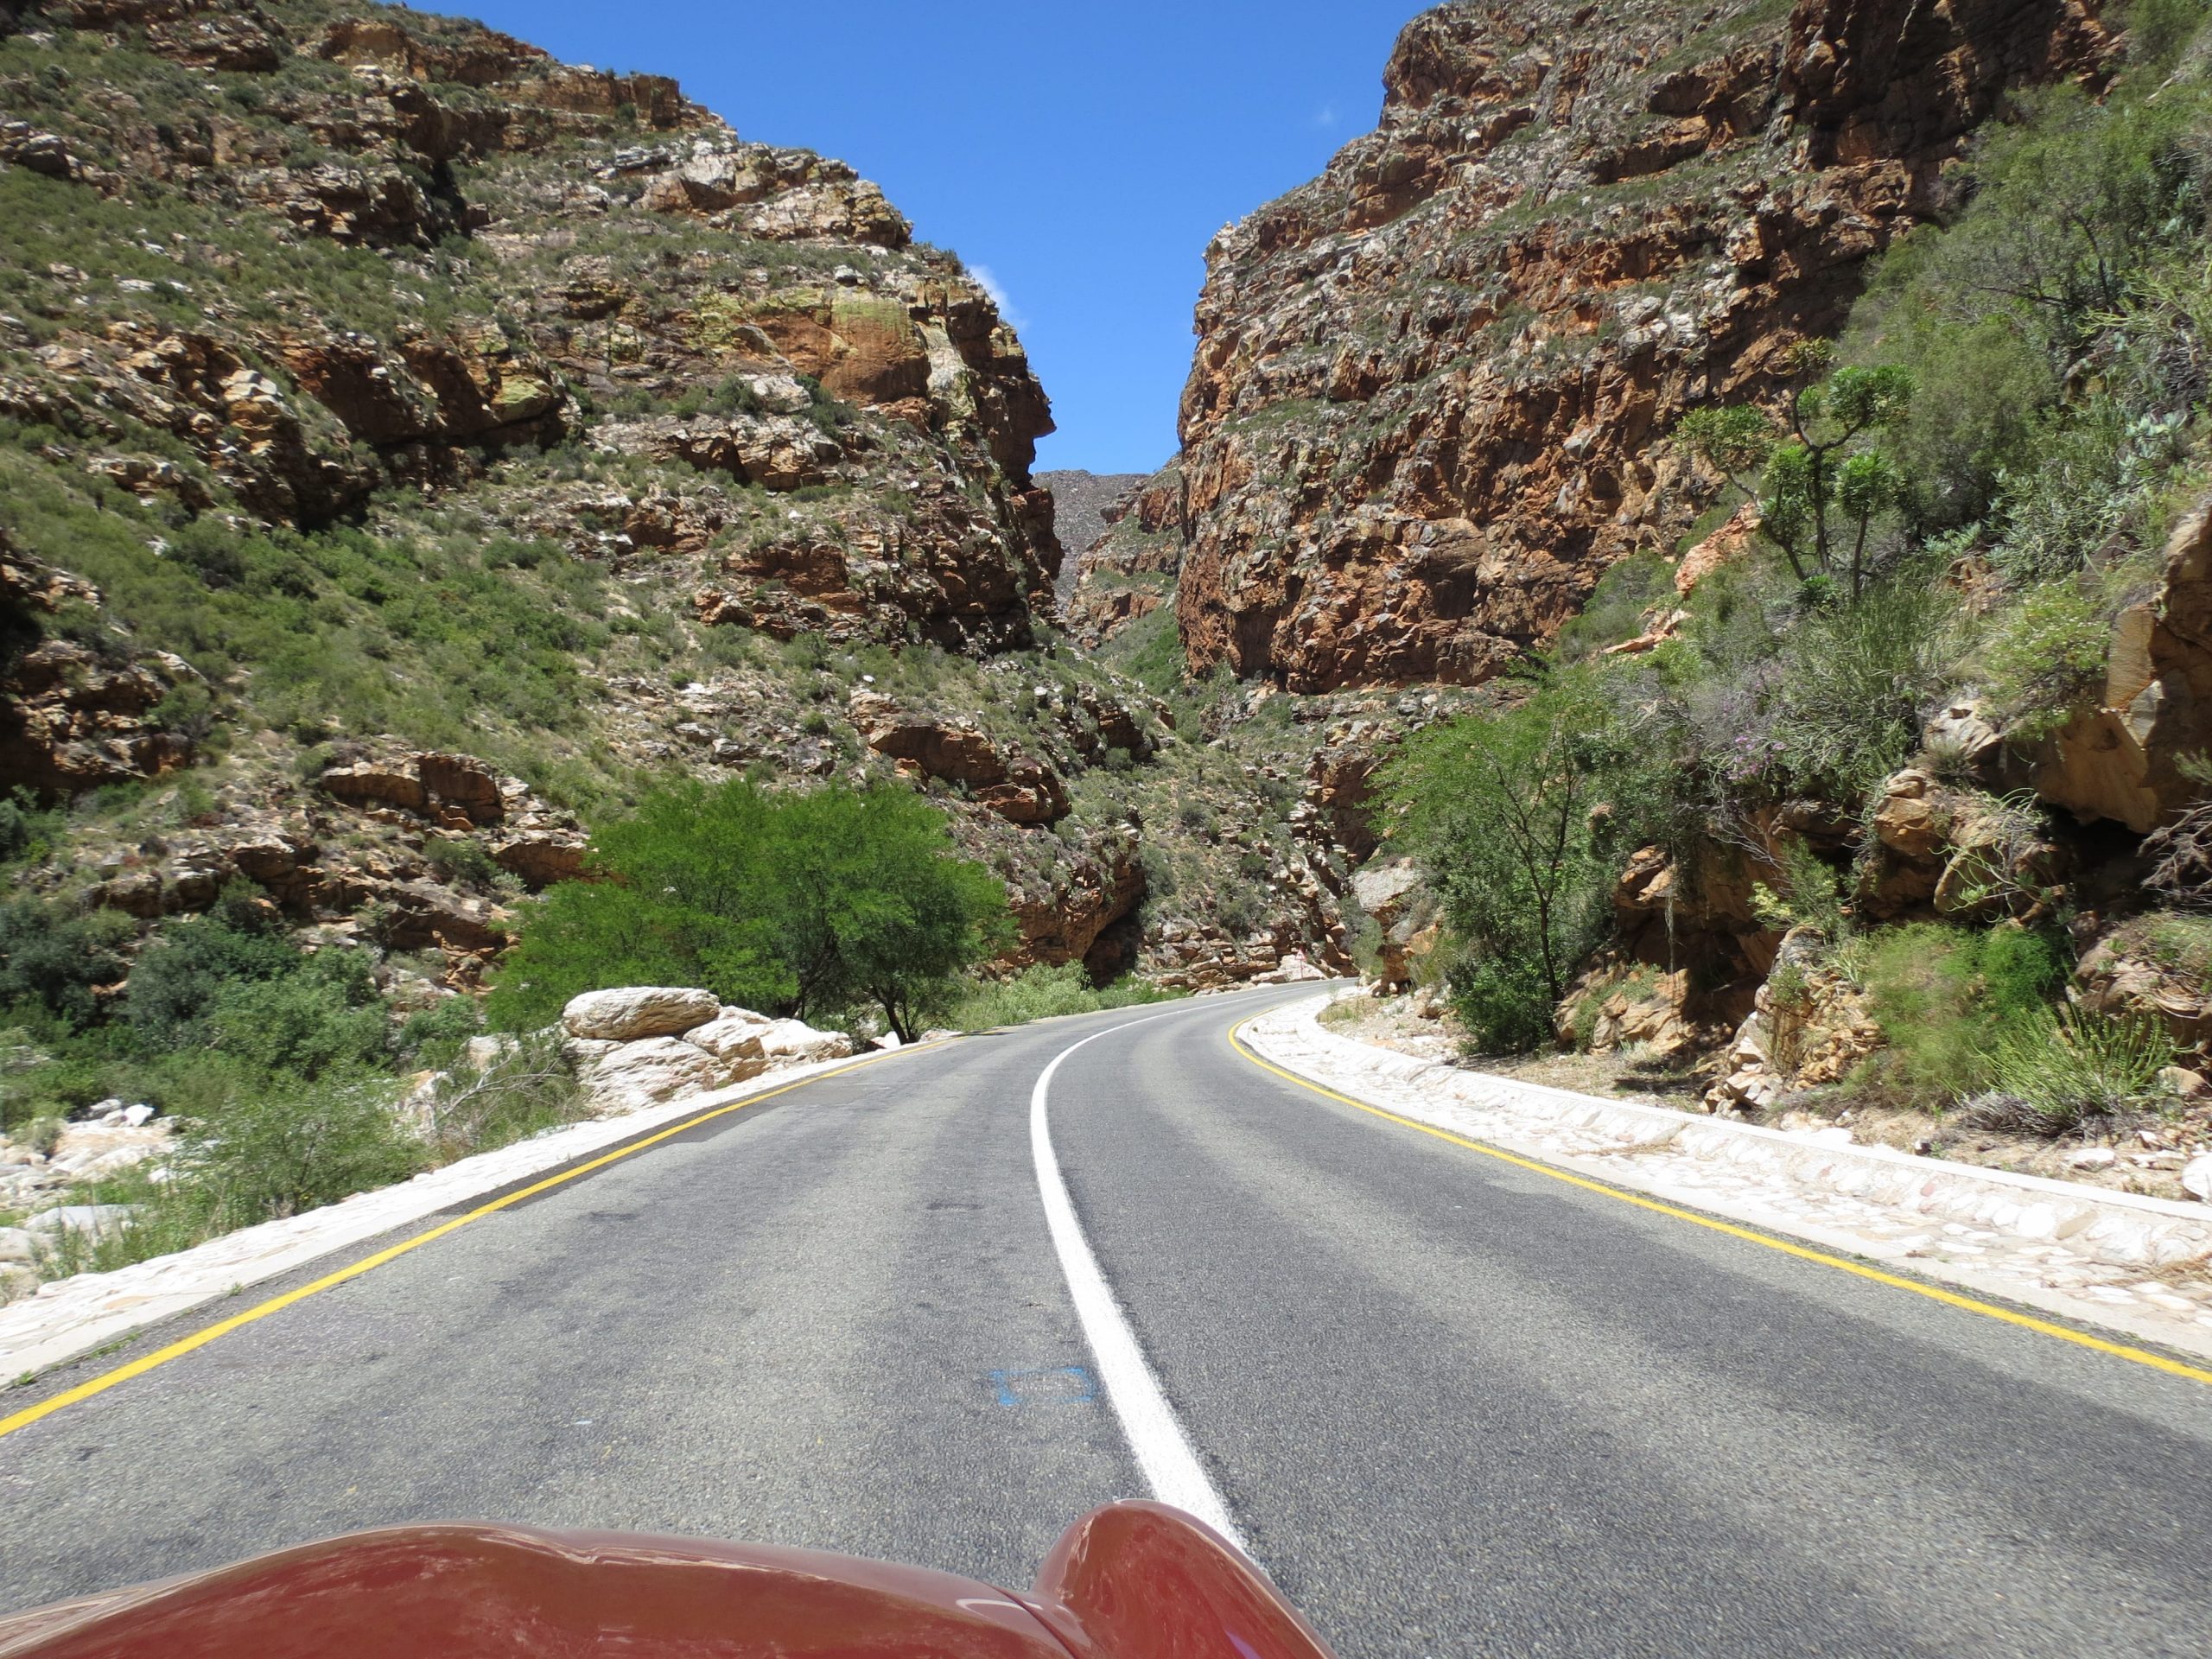 South Africa Driving Tour with Classic Travelling - Meiringspoort